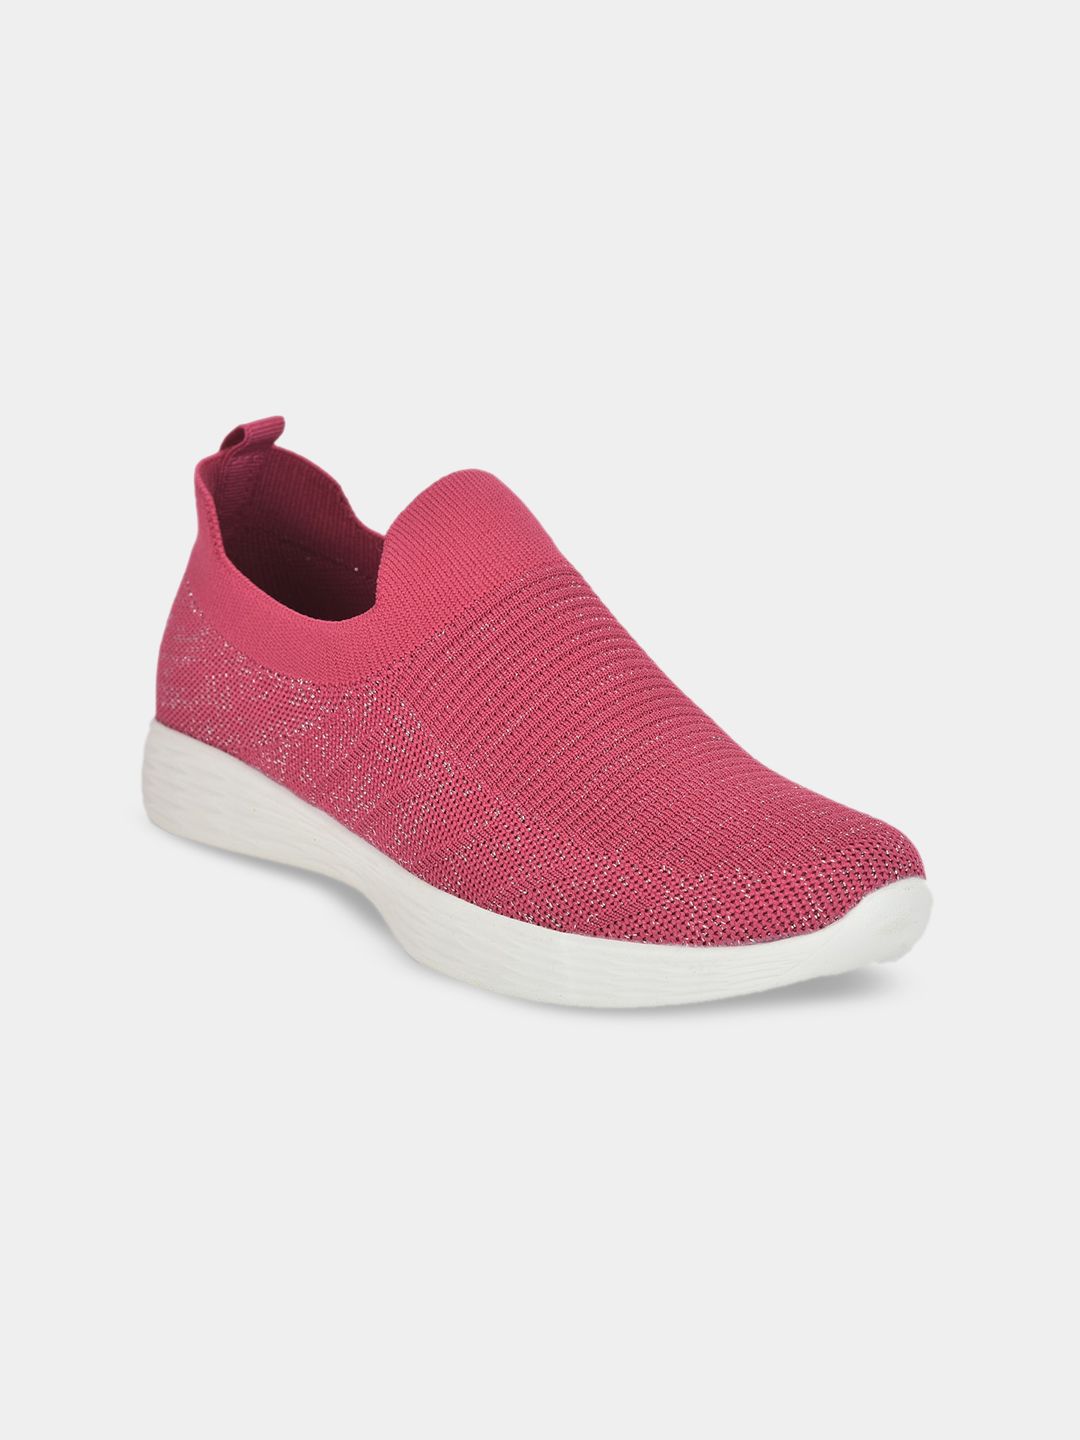 Aqualite Women Pink Woven Design Slip-On Sneakers Price in India